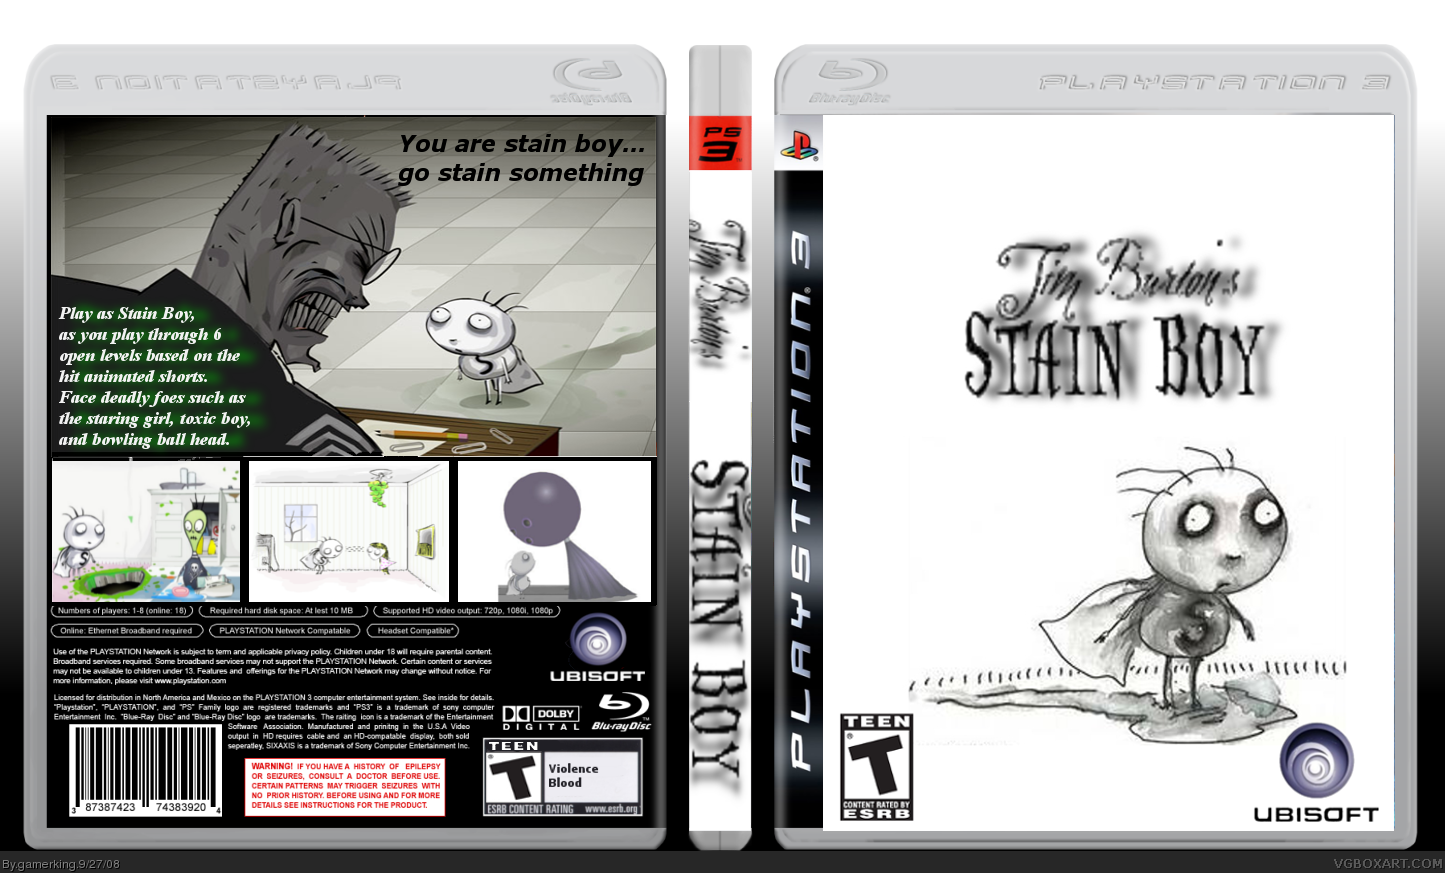 The World of Stain Boy box cover